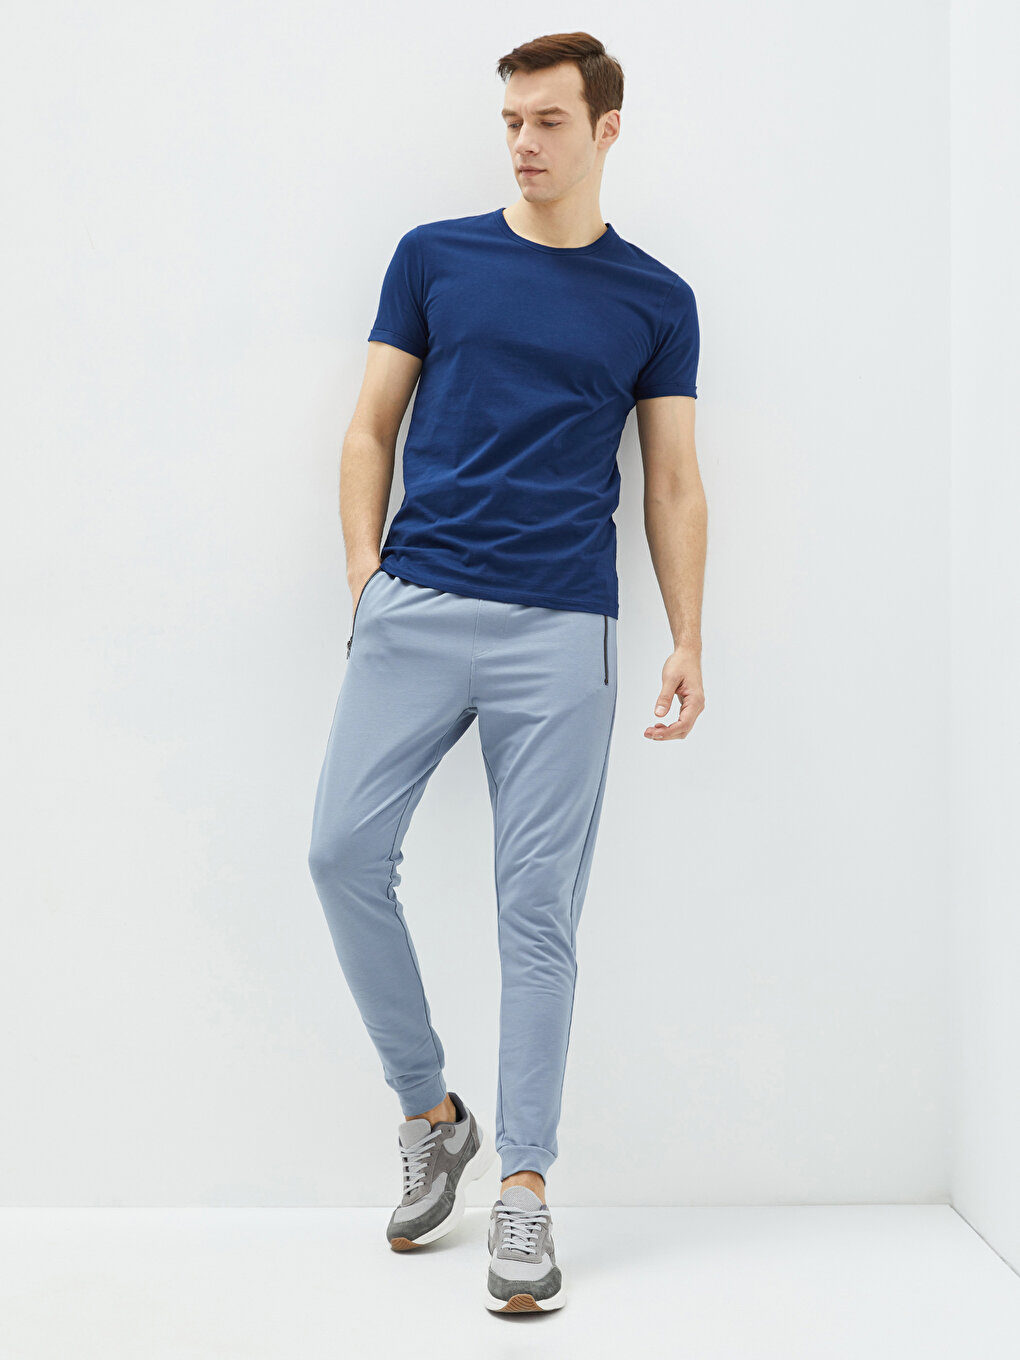 French Terry Sweatpants – The Shop at Equinox